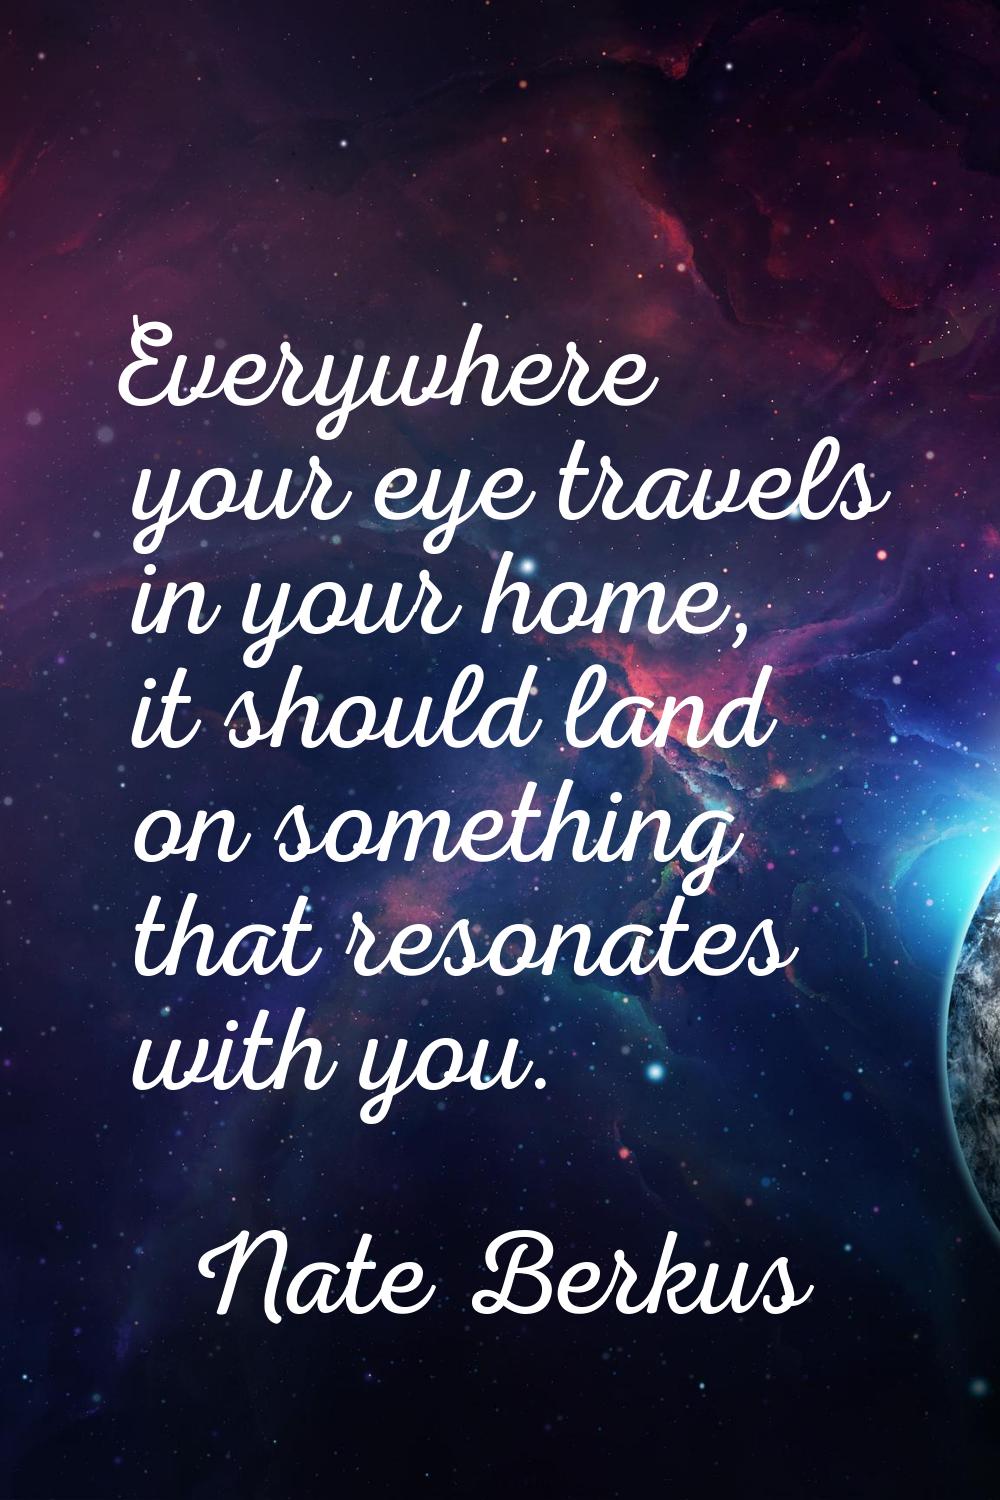 Everywhere your eye travels in your home, it should land on something that resonates with you.